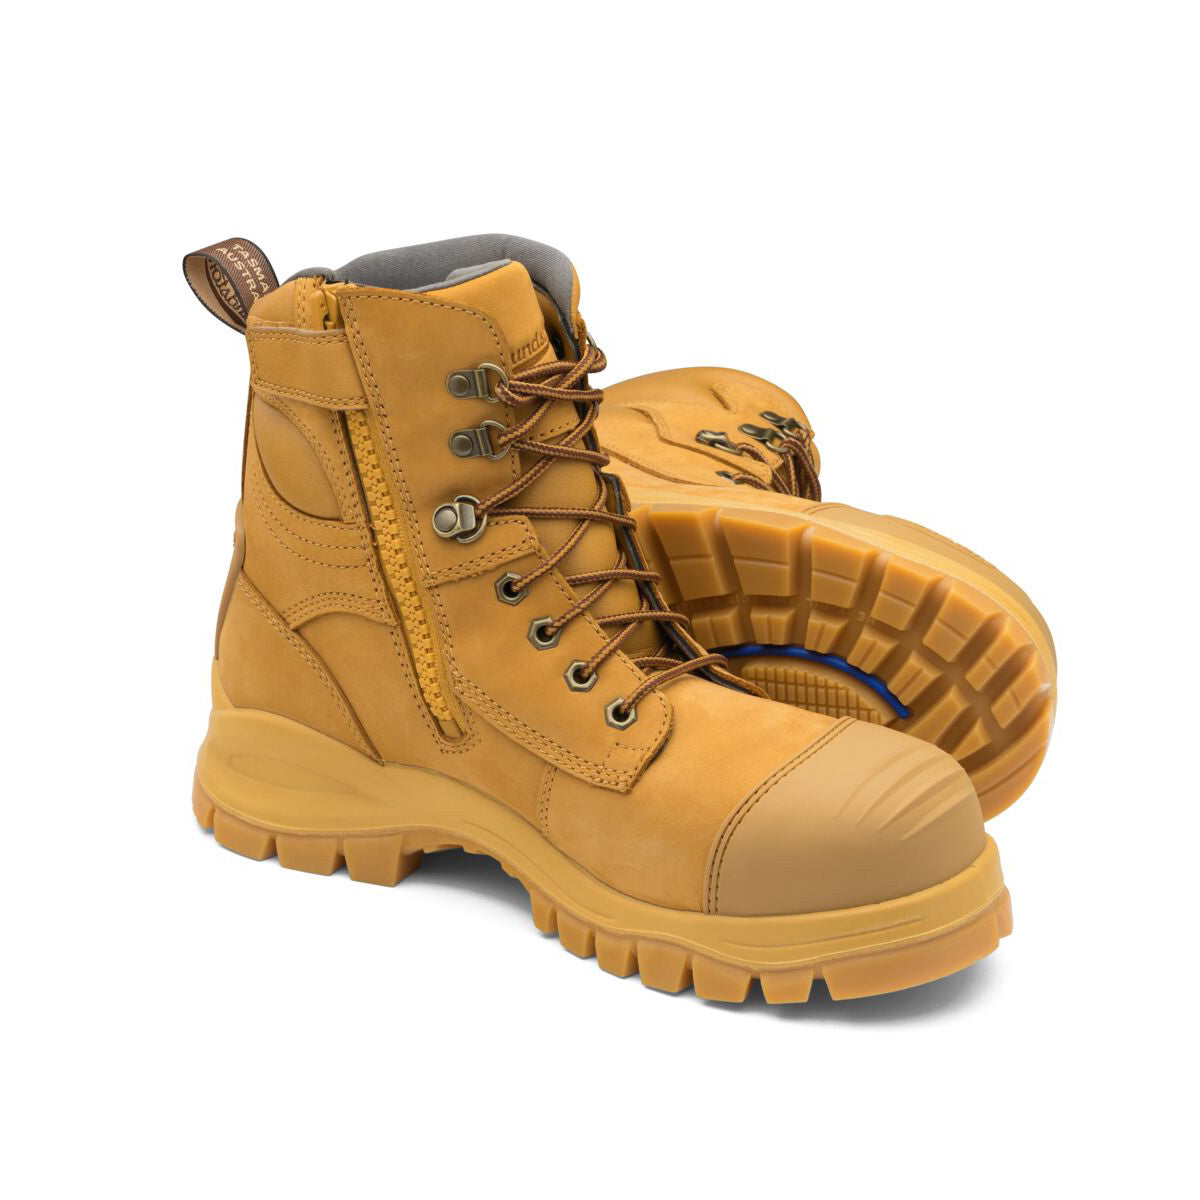 Blundstone Size Men's 6.5/Women's 8.5 Yellow #992 Leather Steel Toe Boots With Rubber